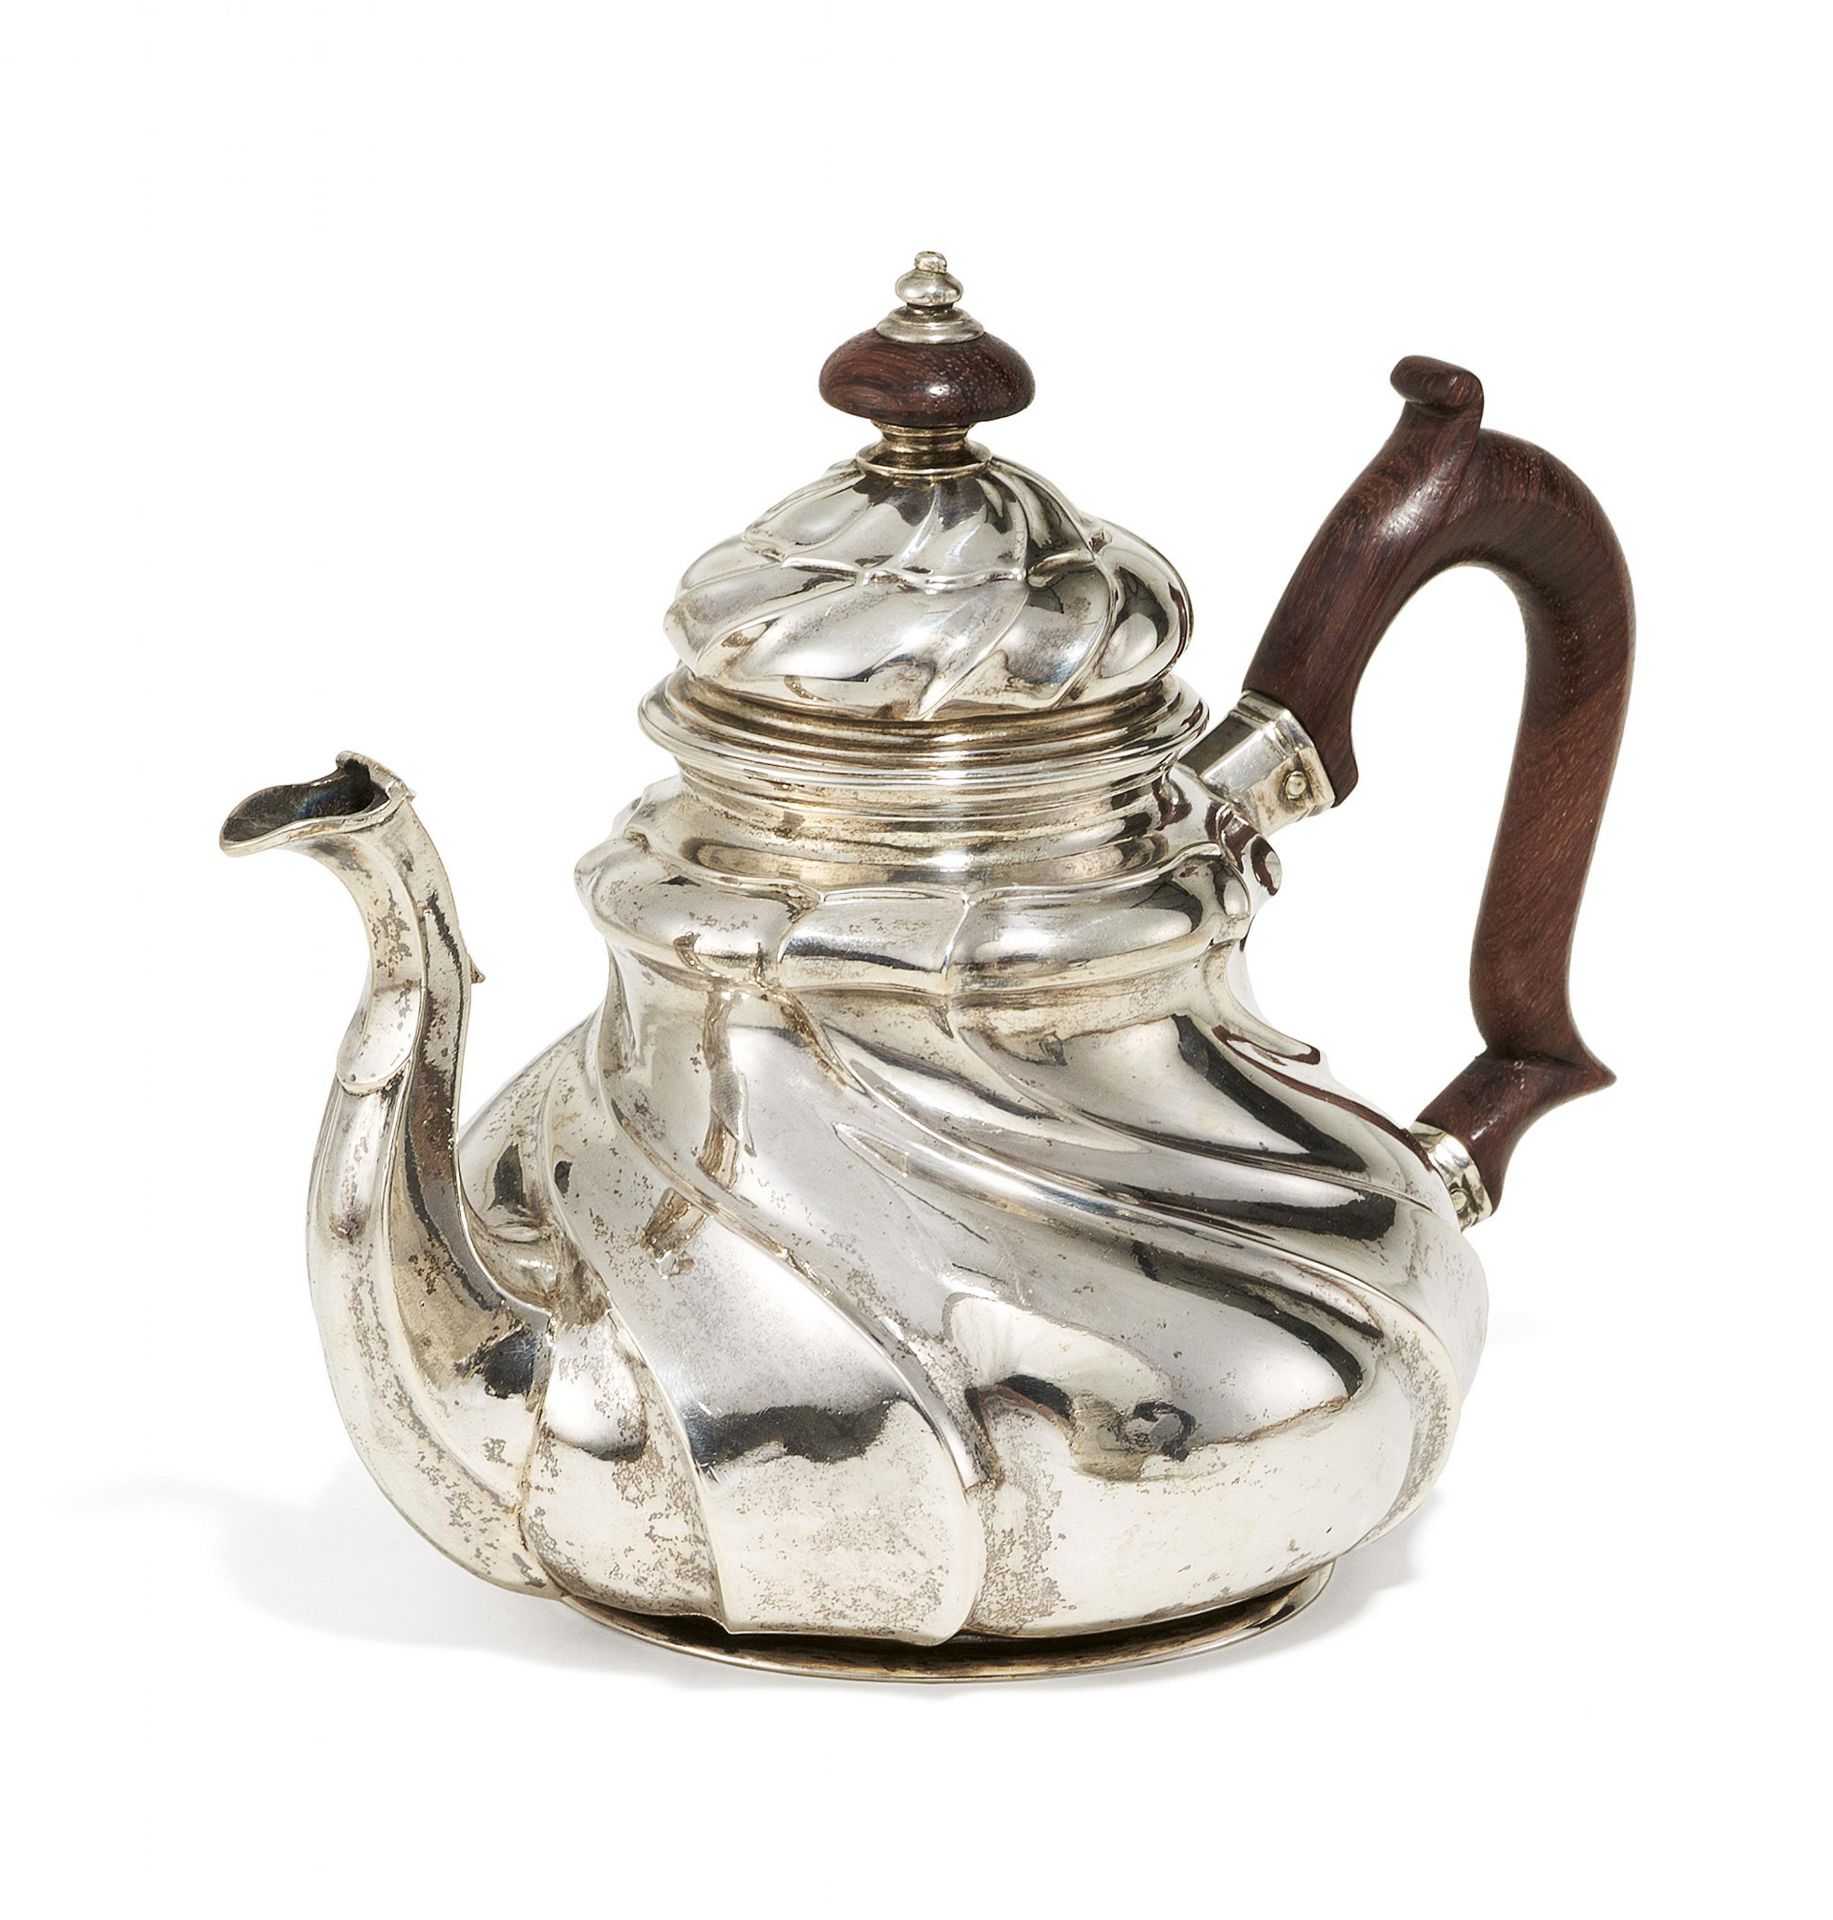 SILVER TEAPOT WITH TWIST-FLUTED FEATURES.